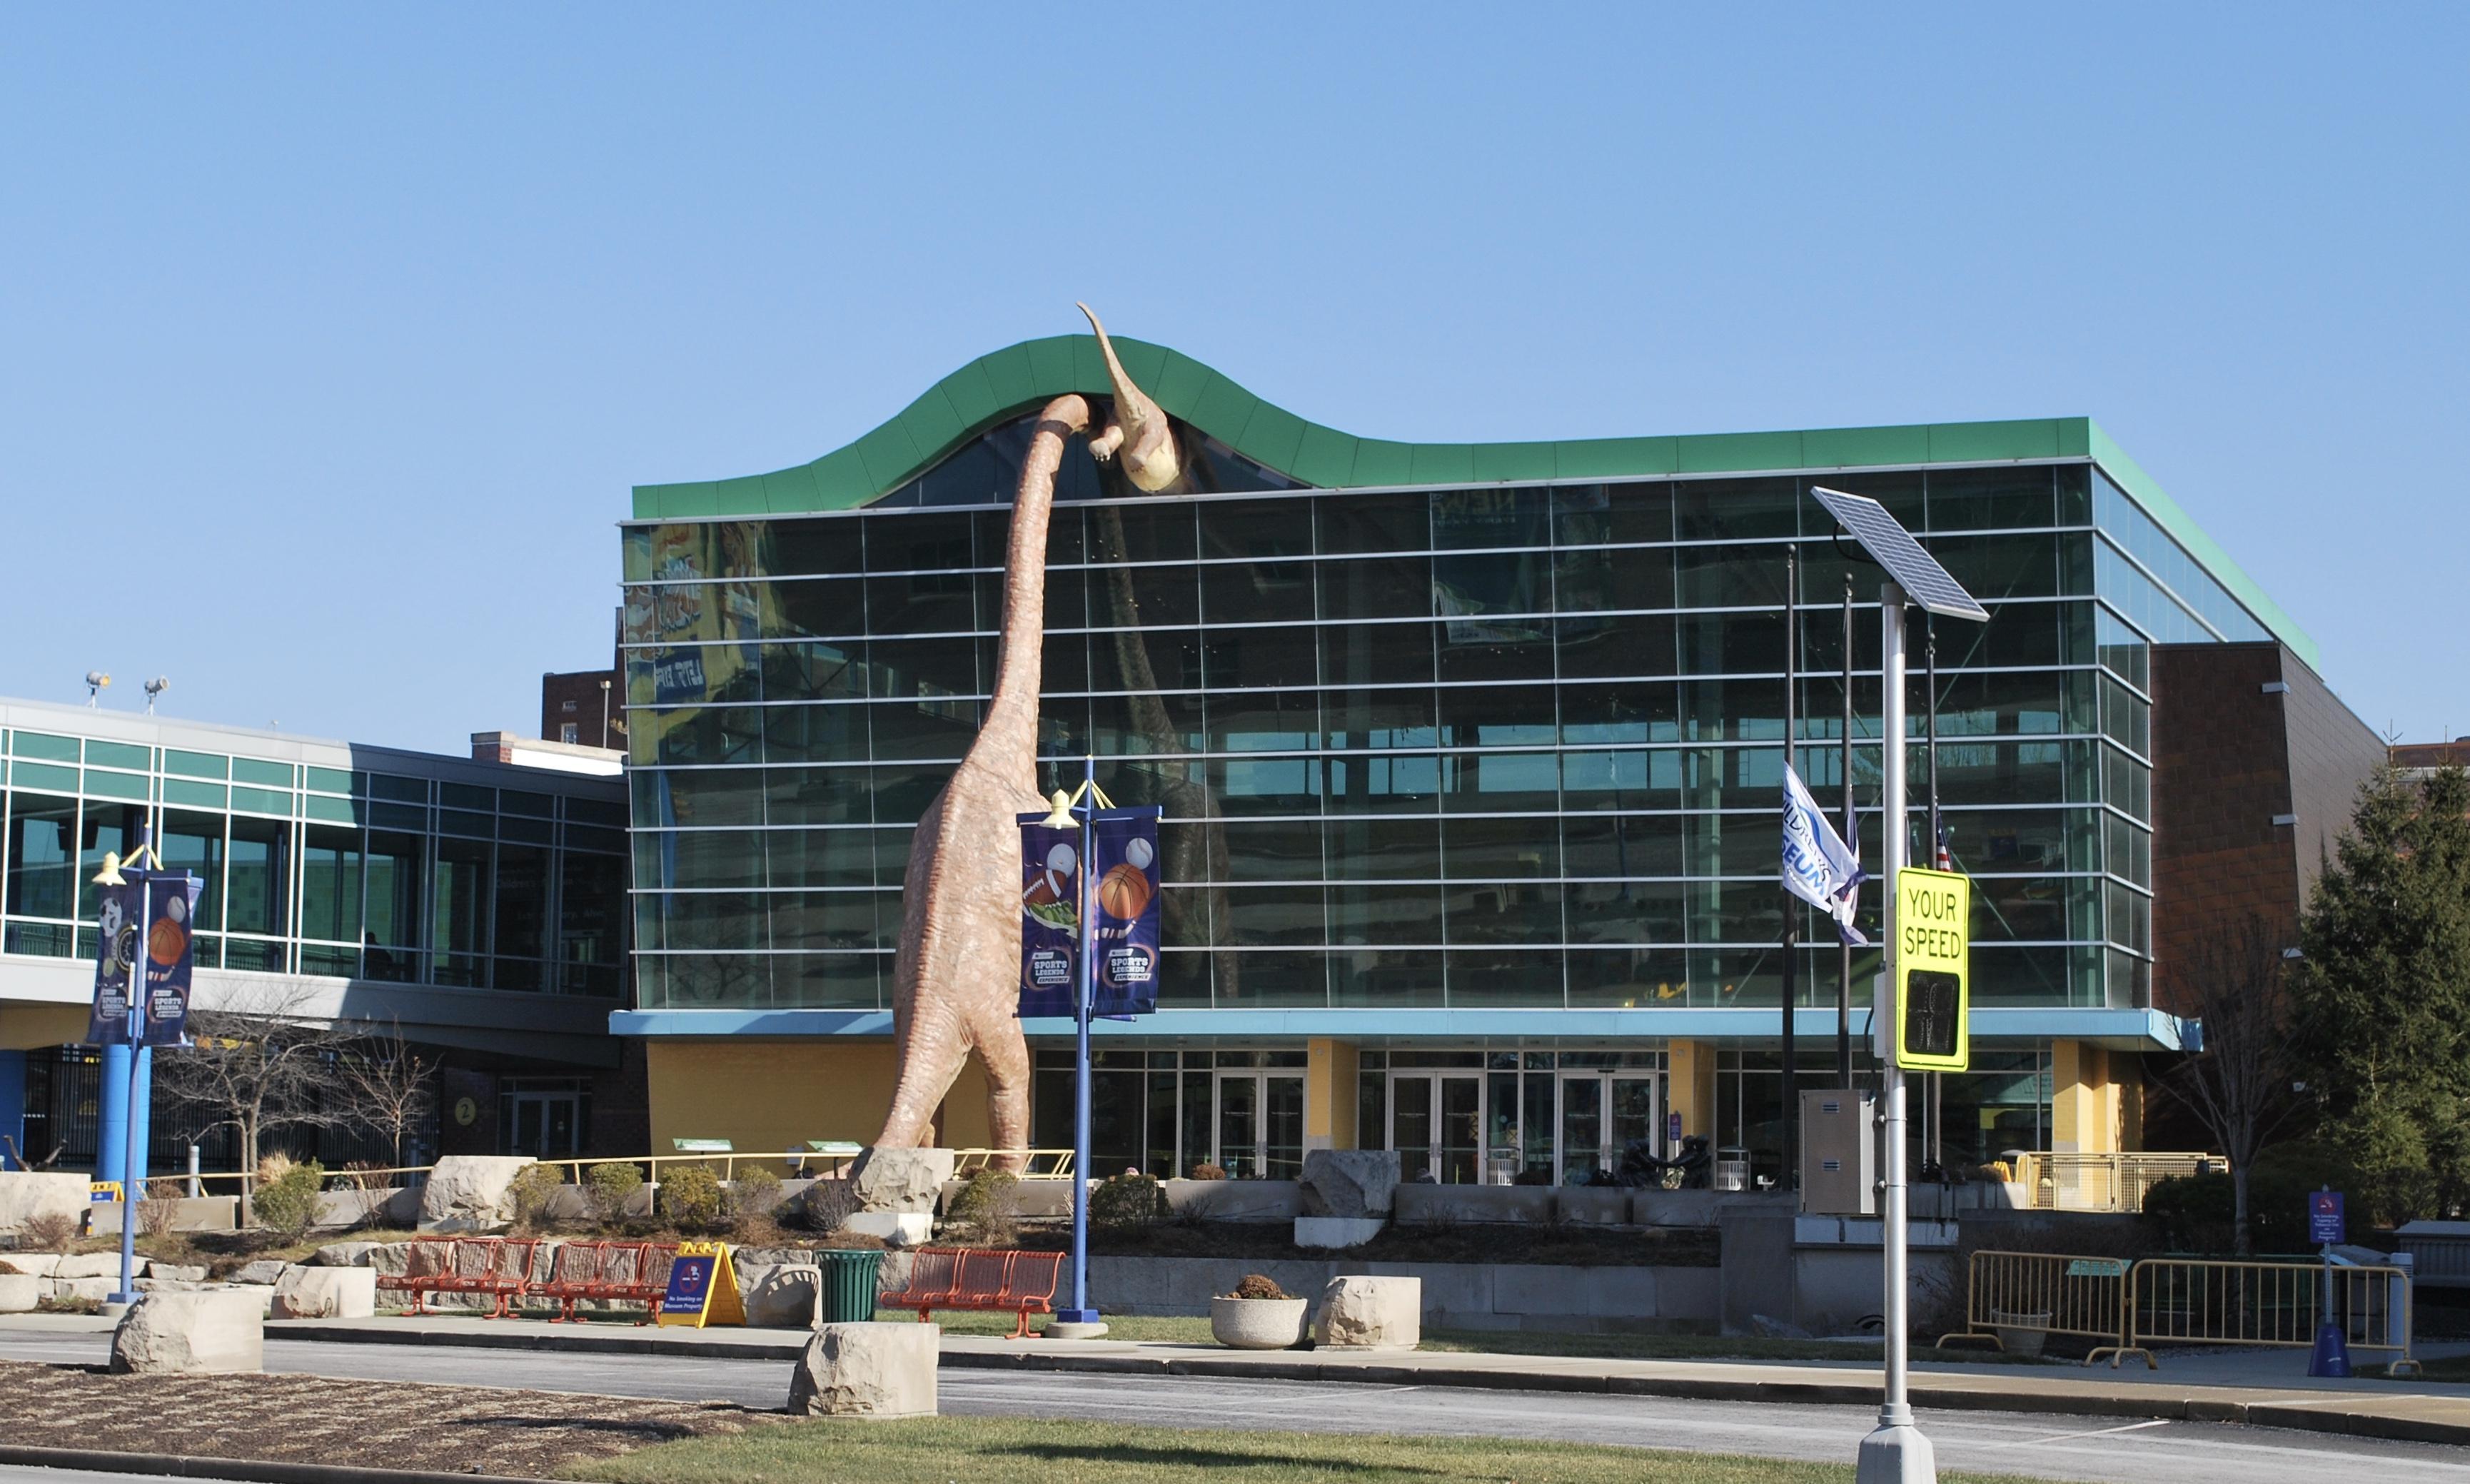 A dinosaur statue that is as tall as the building is situated so that it appears to be looking into the glass front. 